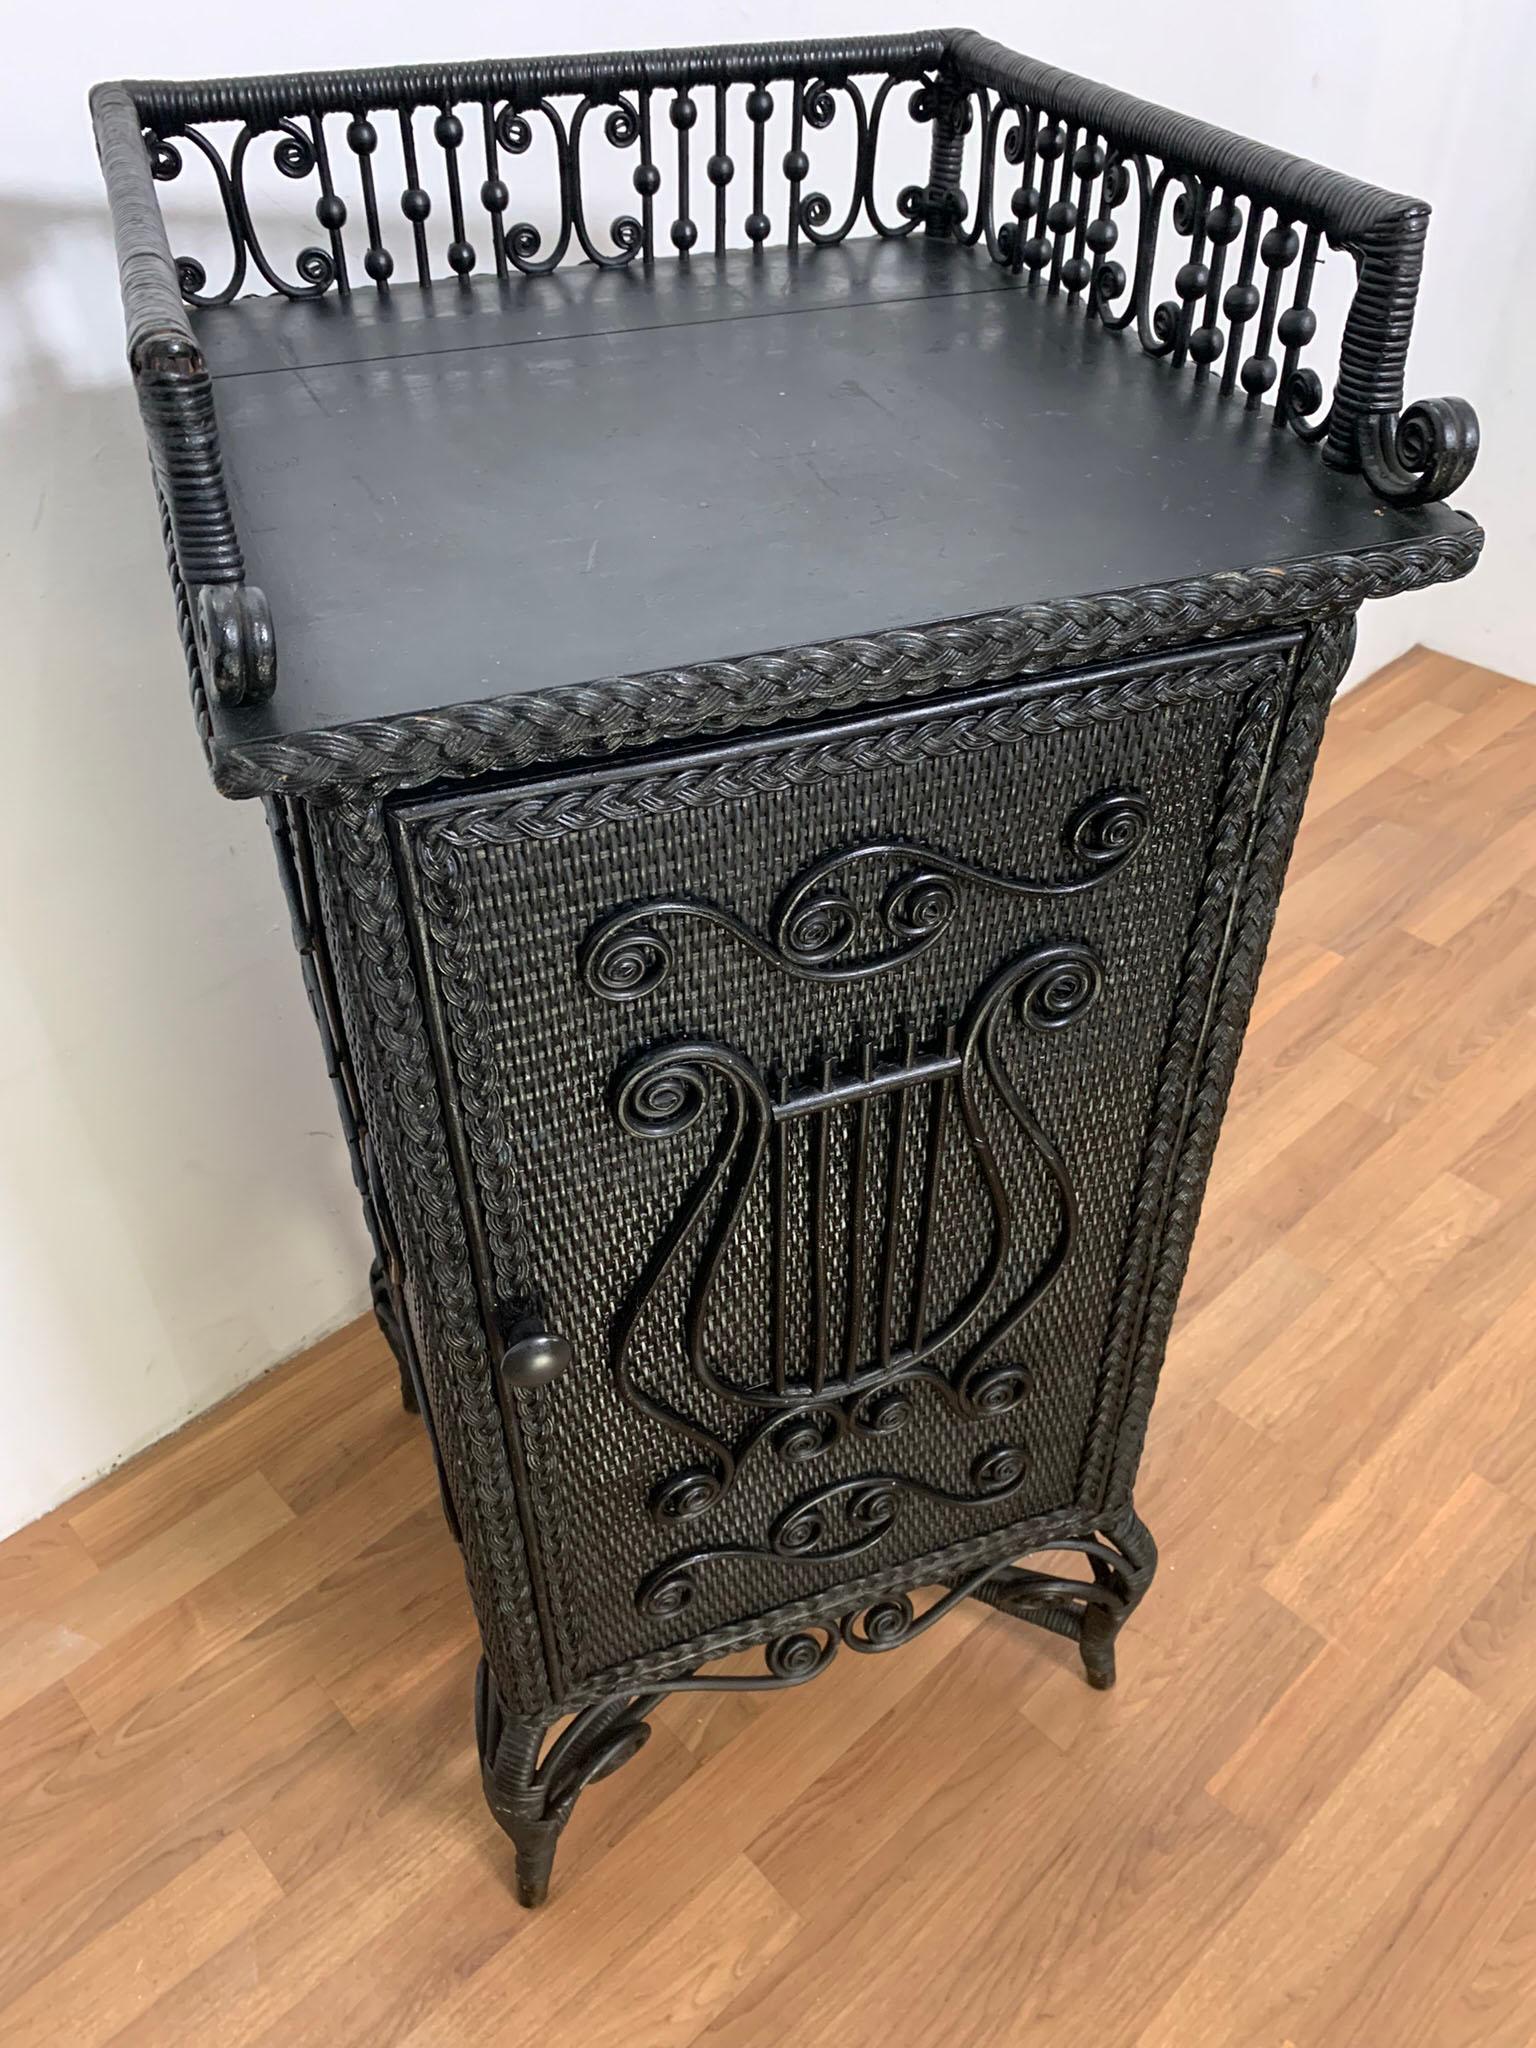 A rare Aesthetic Movement music cabinet adorned with musical notes, in original ebony finish by the Heywood Brothers and Wakefield Company, circa 1890s.